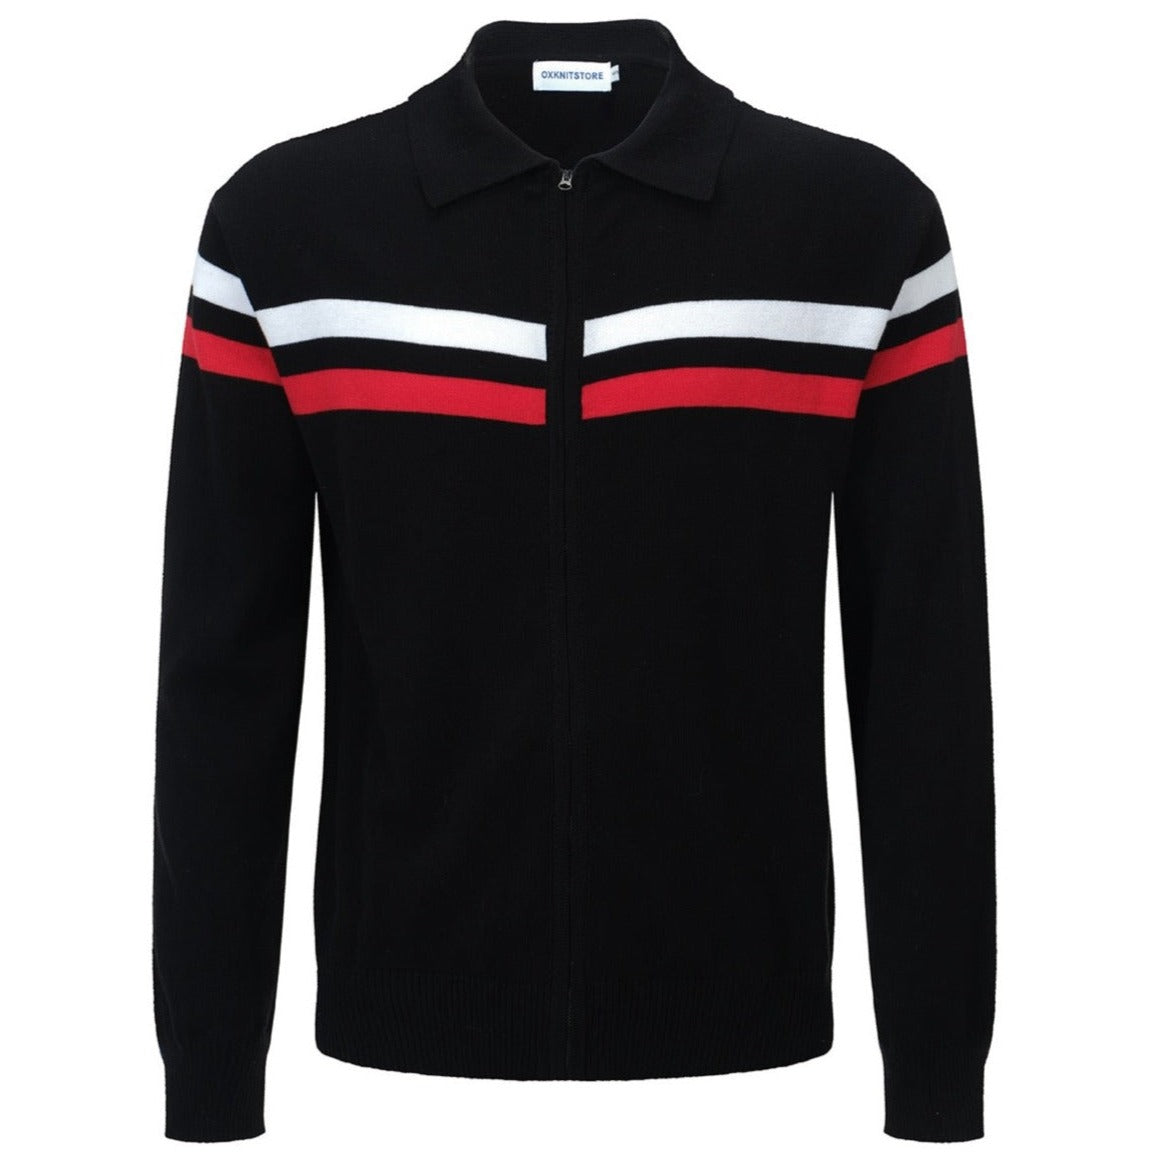 Men's Black Retro Knitted Zip Cardigan With Red & White Racing Stripes Through